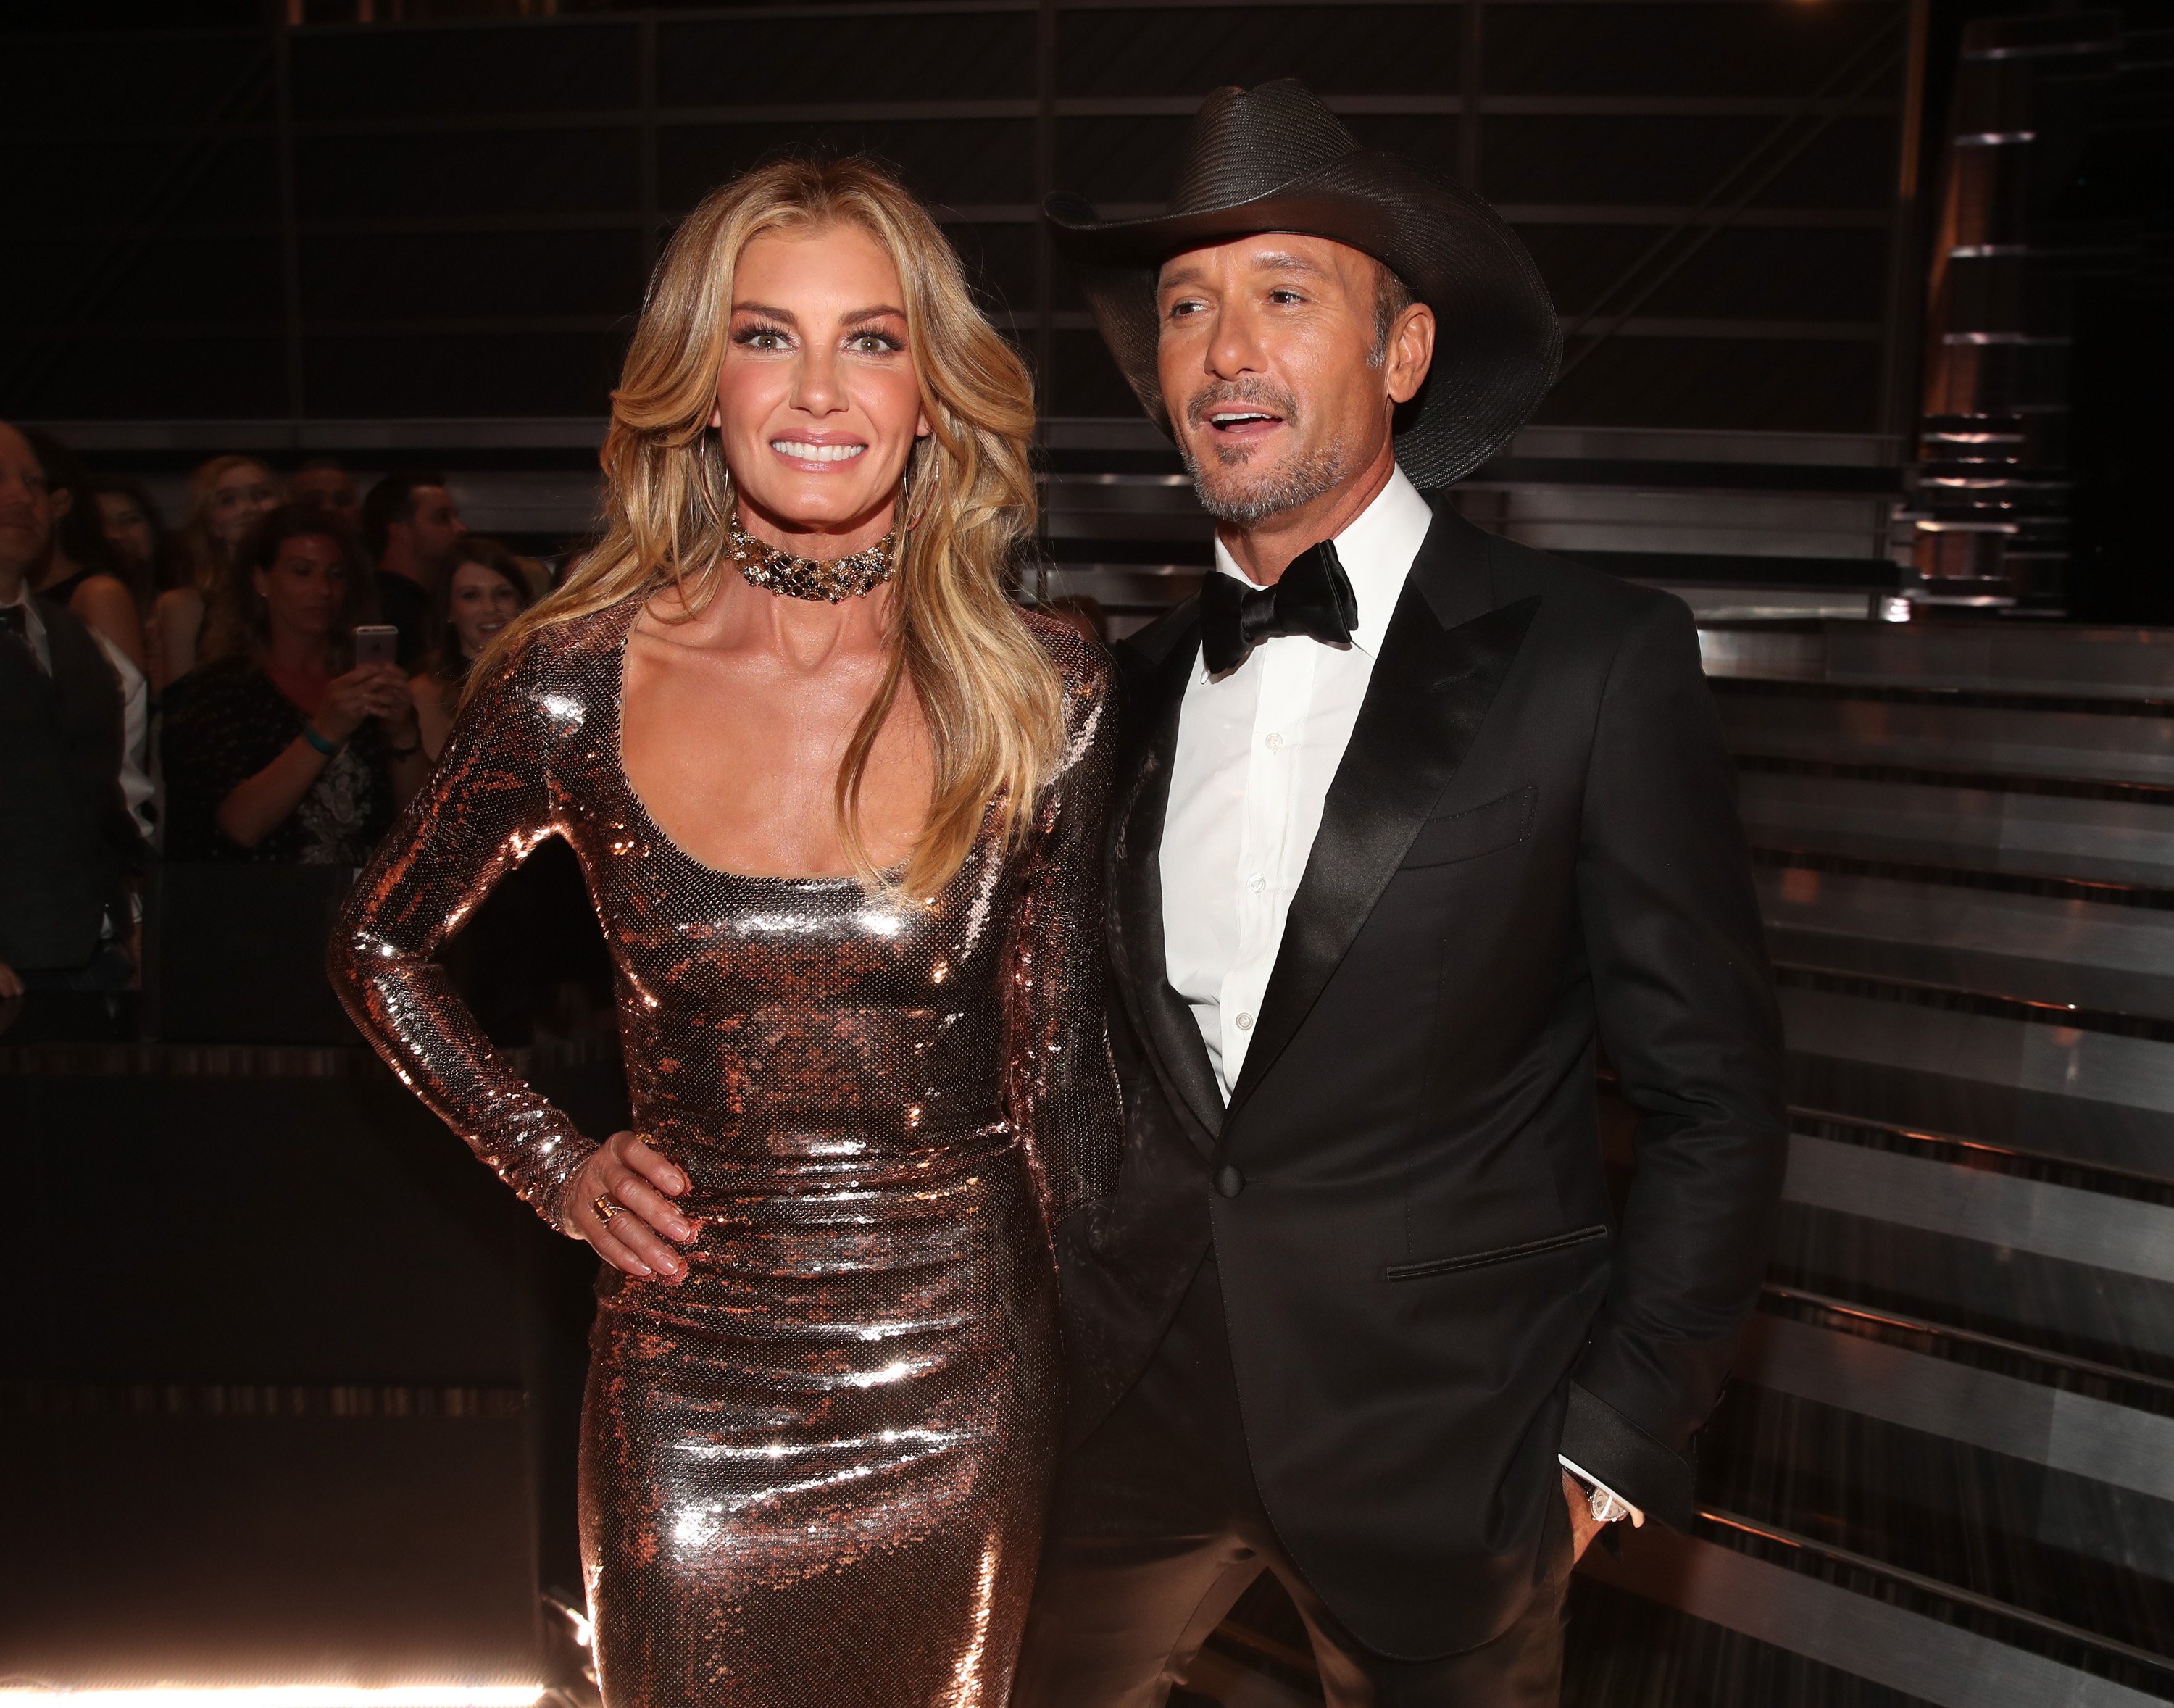 Faith Hill and her husband Tim McGraw at the 52nd Academy of Country Music Awards at T-Mobile Arena on April 2, 2017, in Las Vegas, Nevada | Source: Getty Images